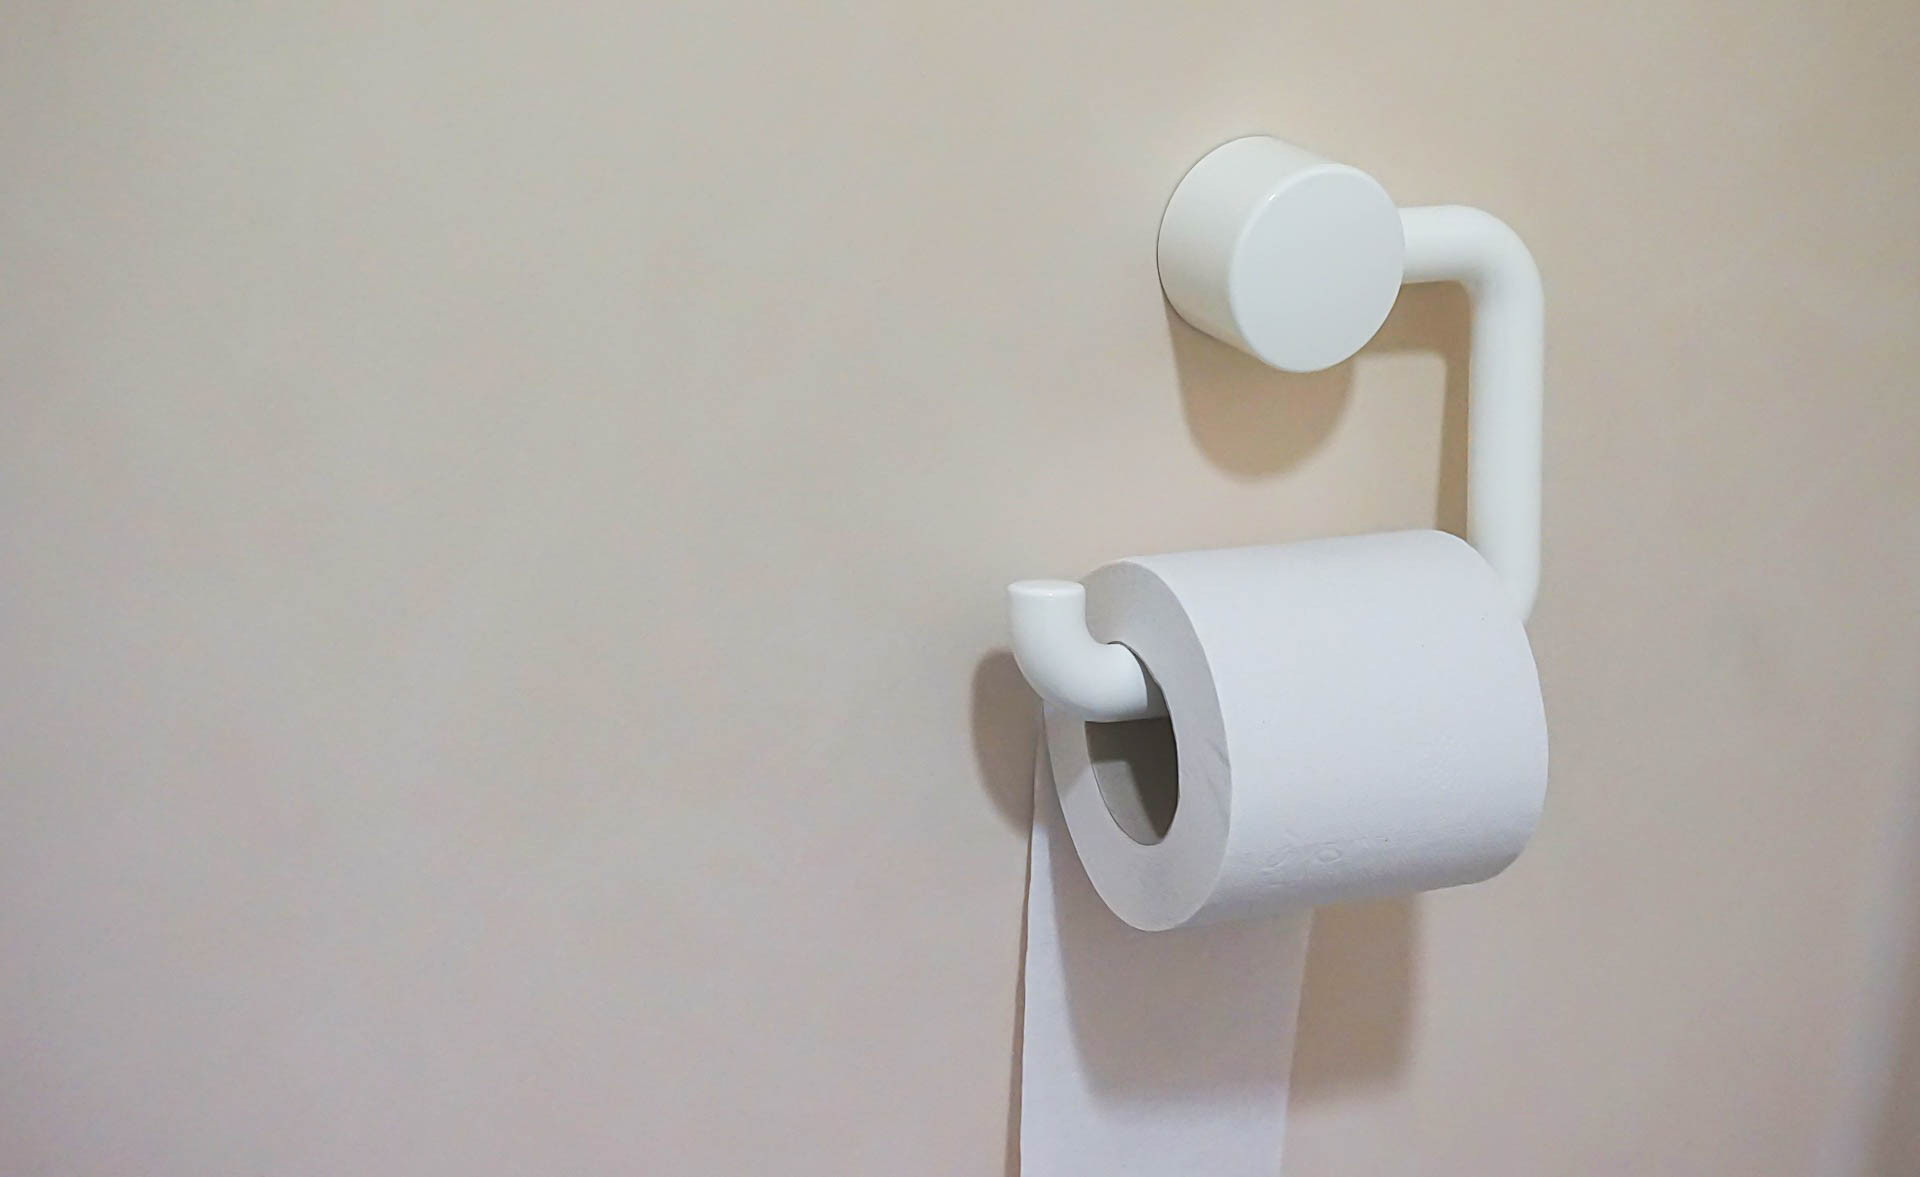 OPINION: Placing toilet paper under the roll prevents mess, hostility